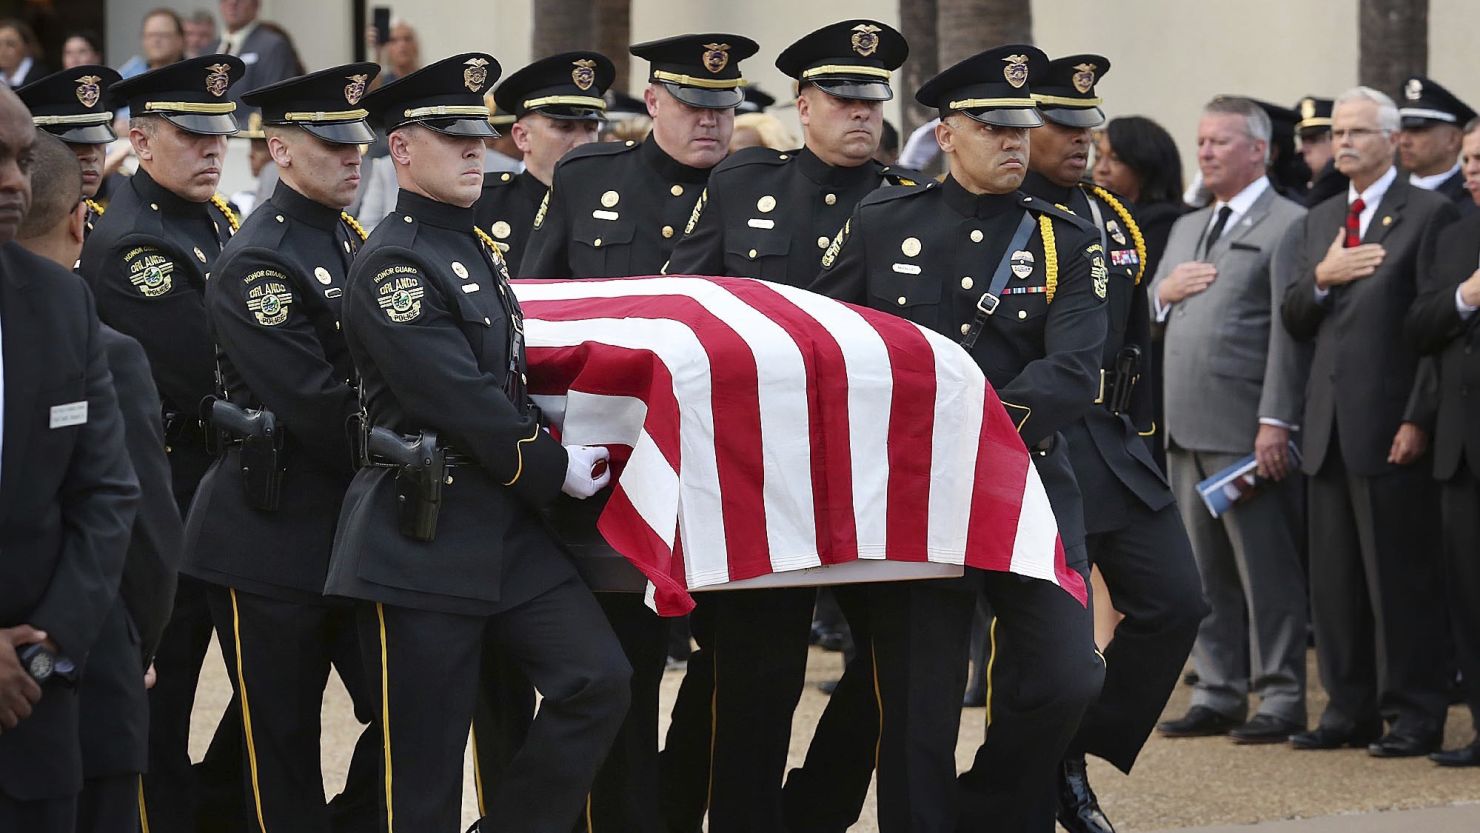 The flag-draped casket of Master Sgt. Debra Clayton is carried to the hearse during her funeral in Orlando at the First Baptist Church on January 14, 2017.